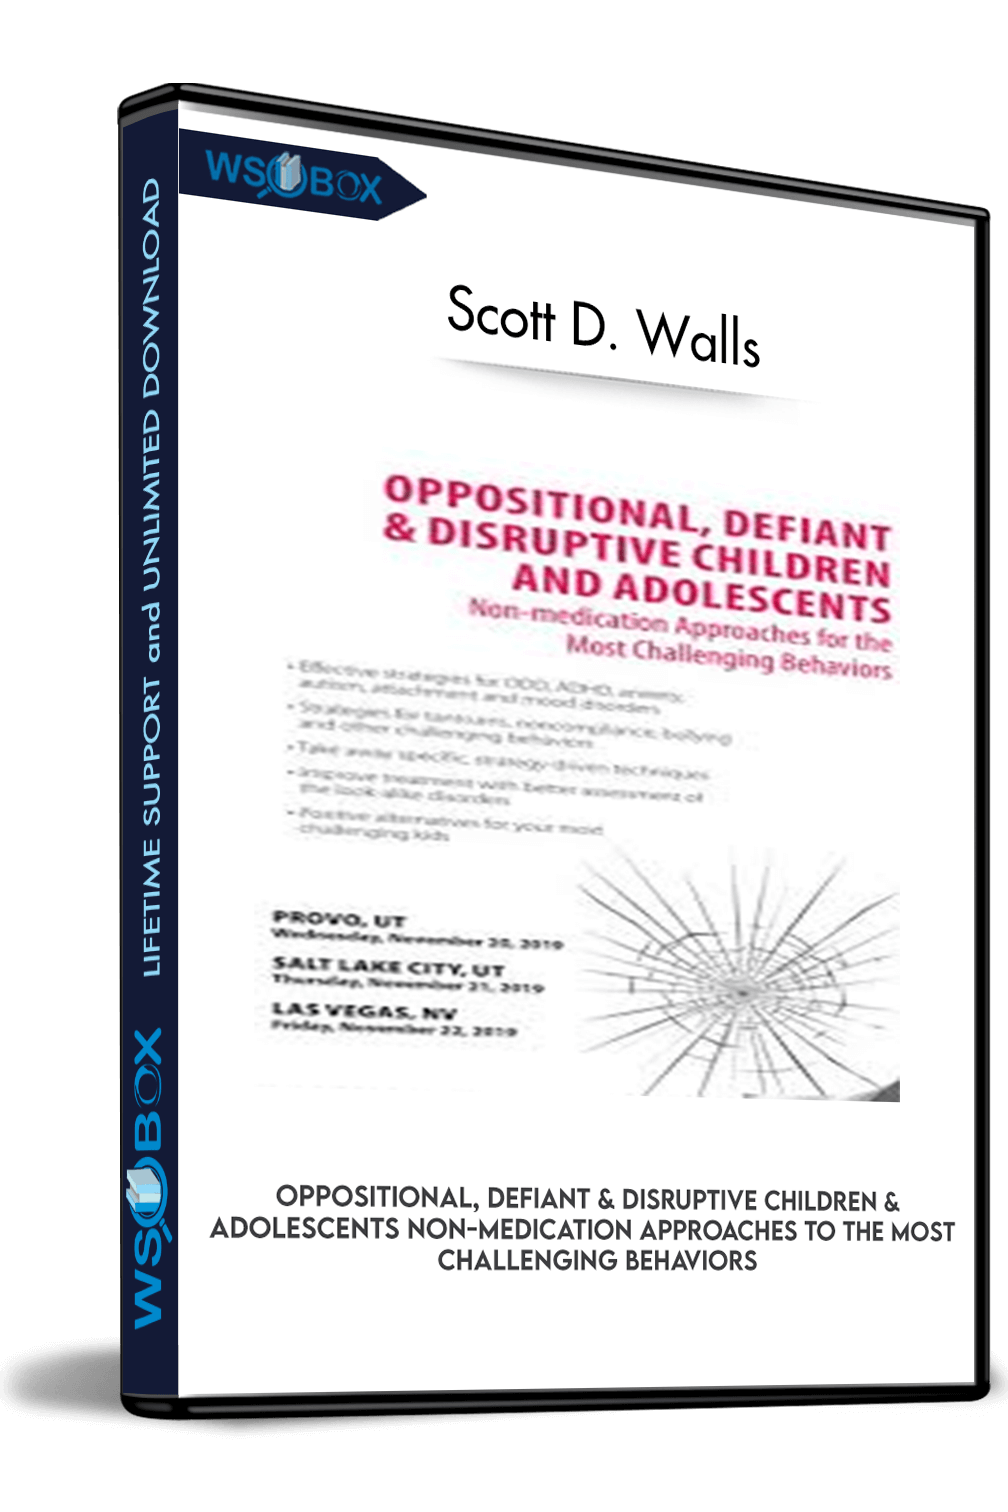 oppositional-defiant-disruptive-children-adolescents-non-medication-approaches-to-the-most-challenging-behaviors-scott-d-walls